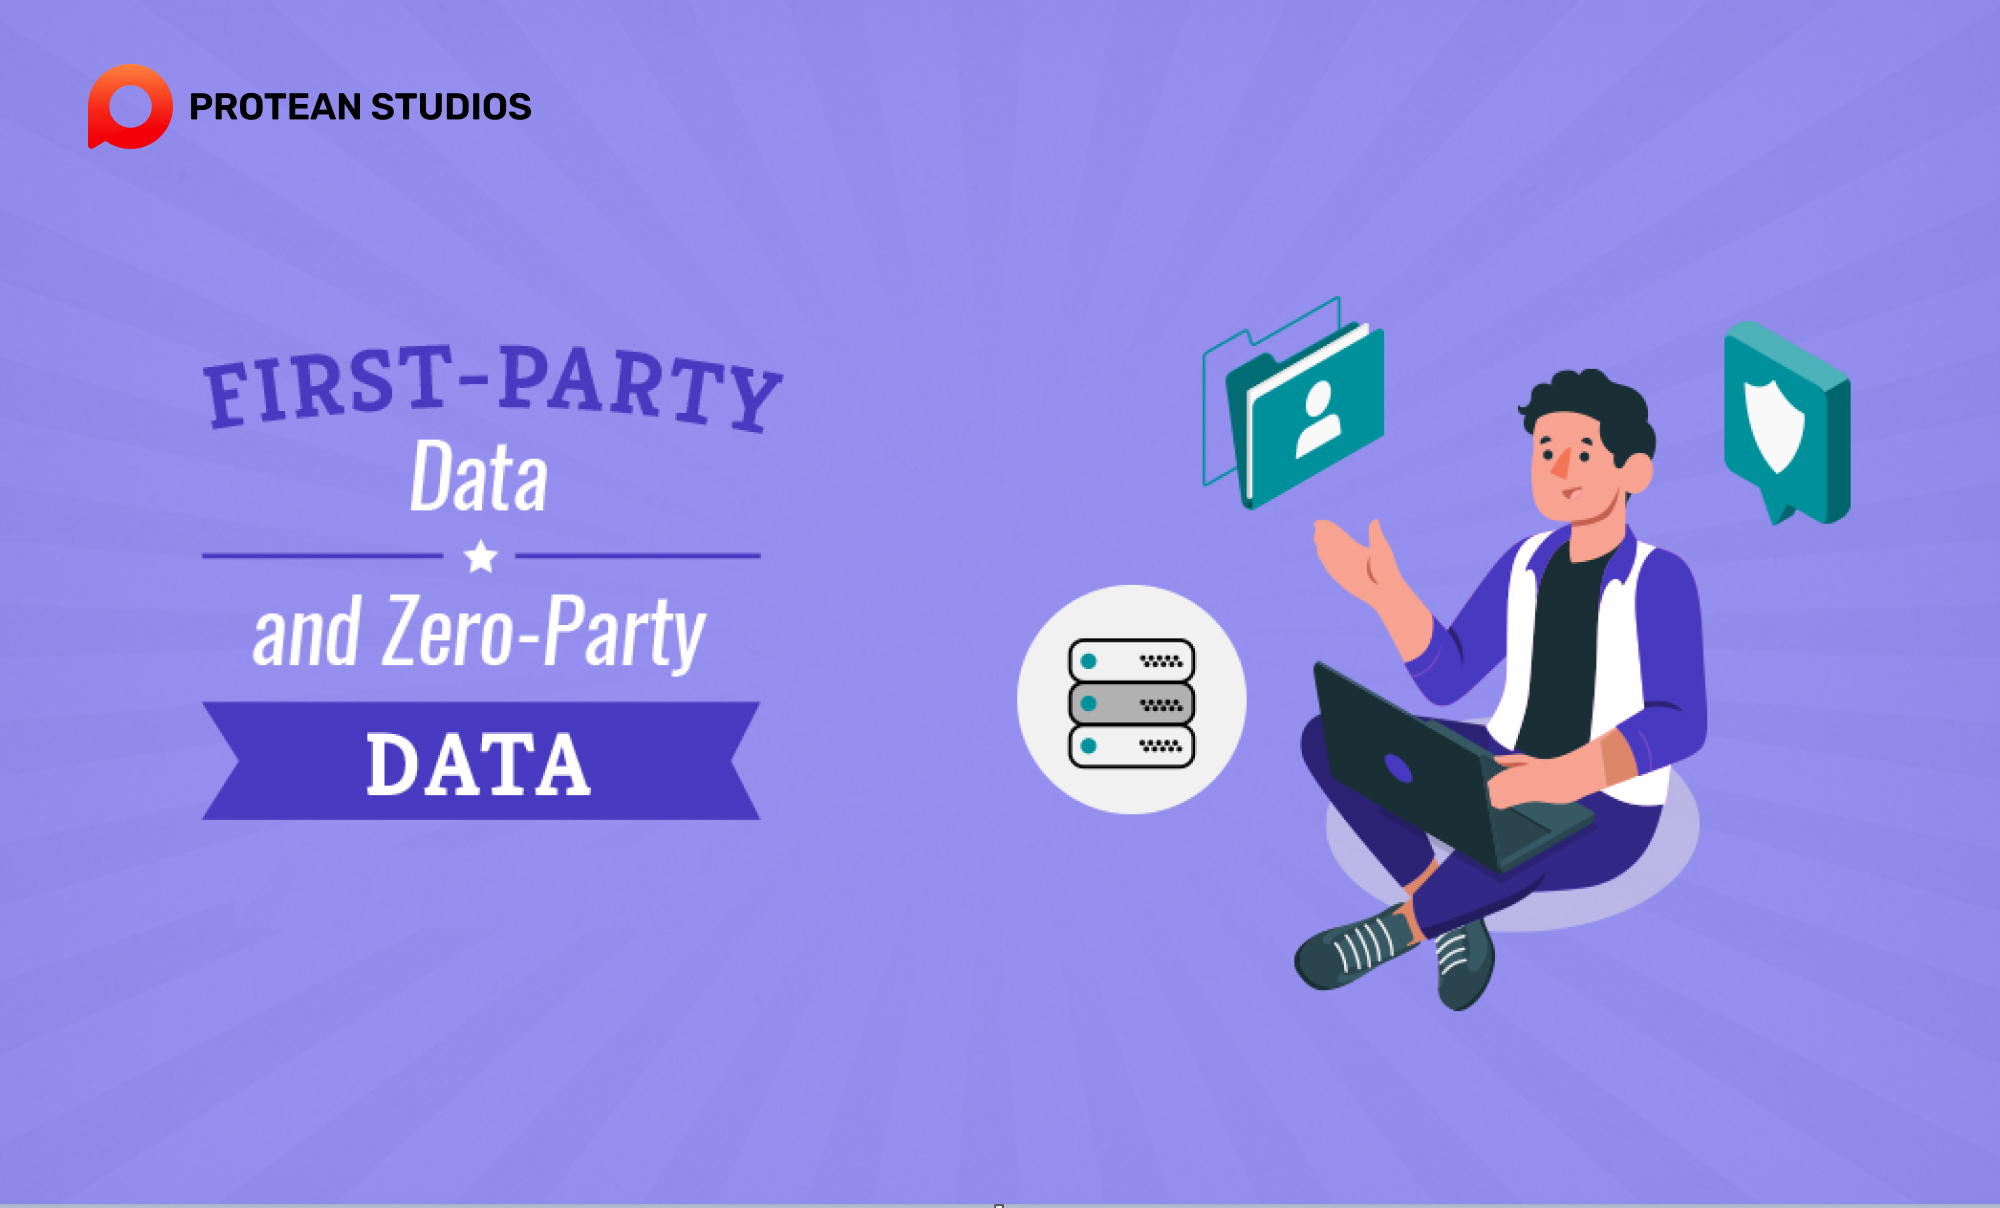 Some reasons why 2024 is an era of zero-party data and first-party data